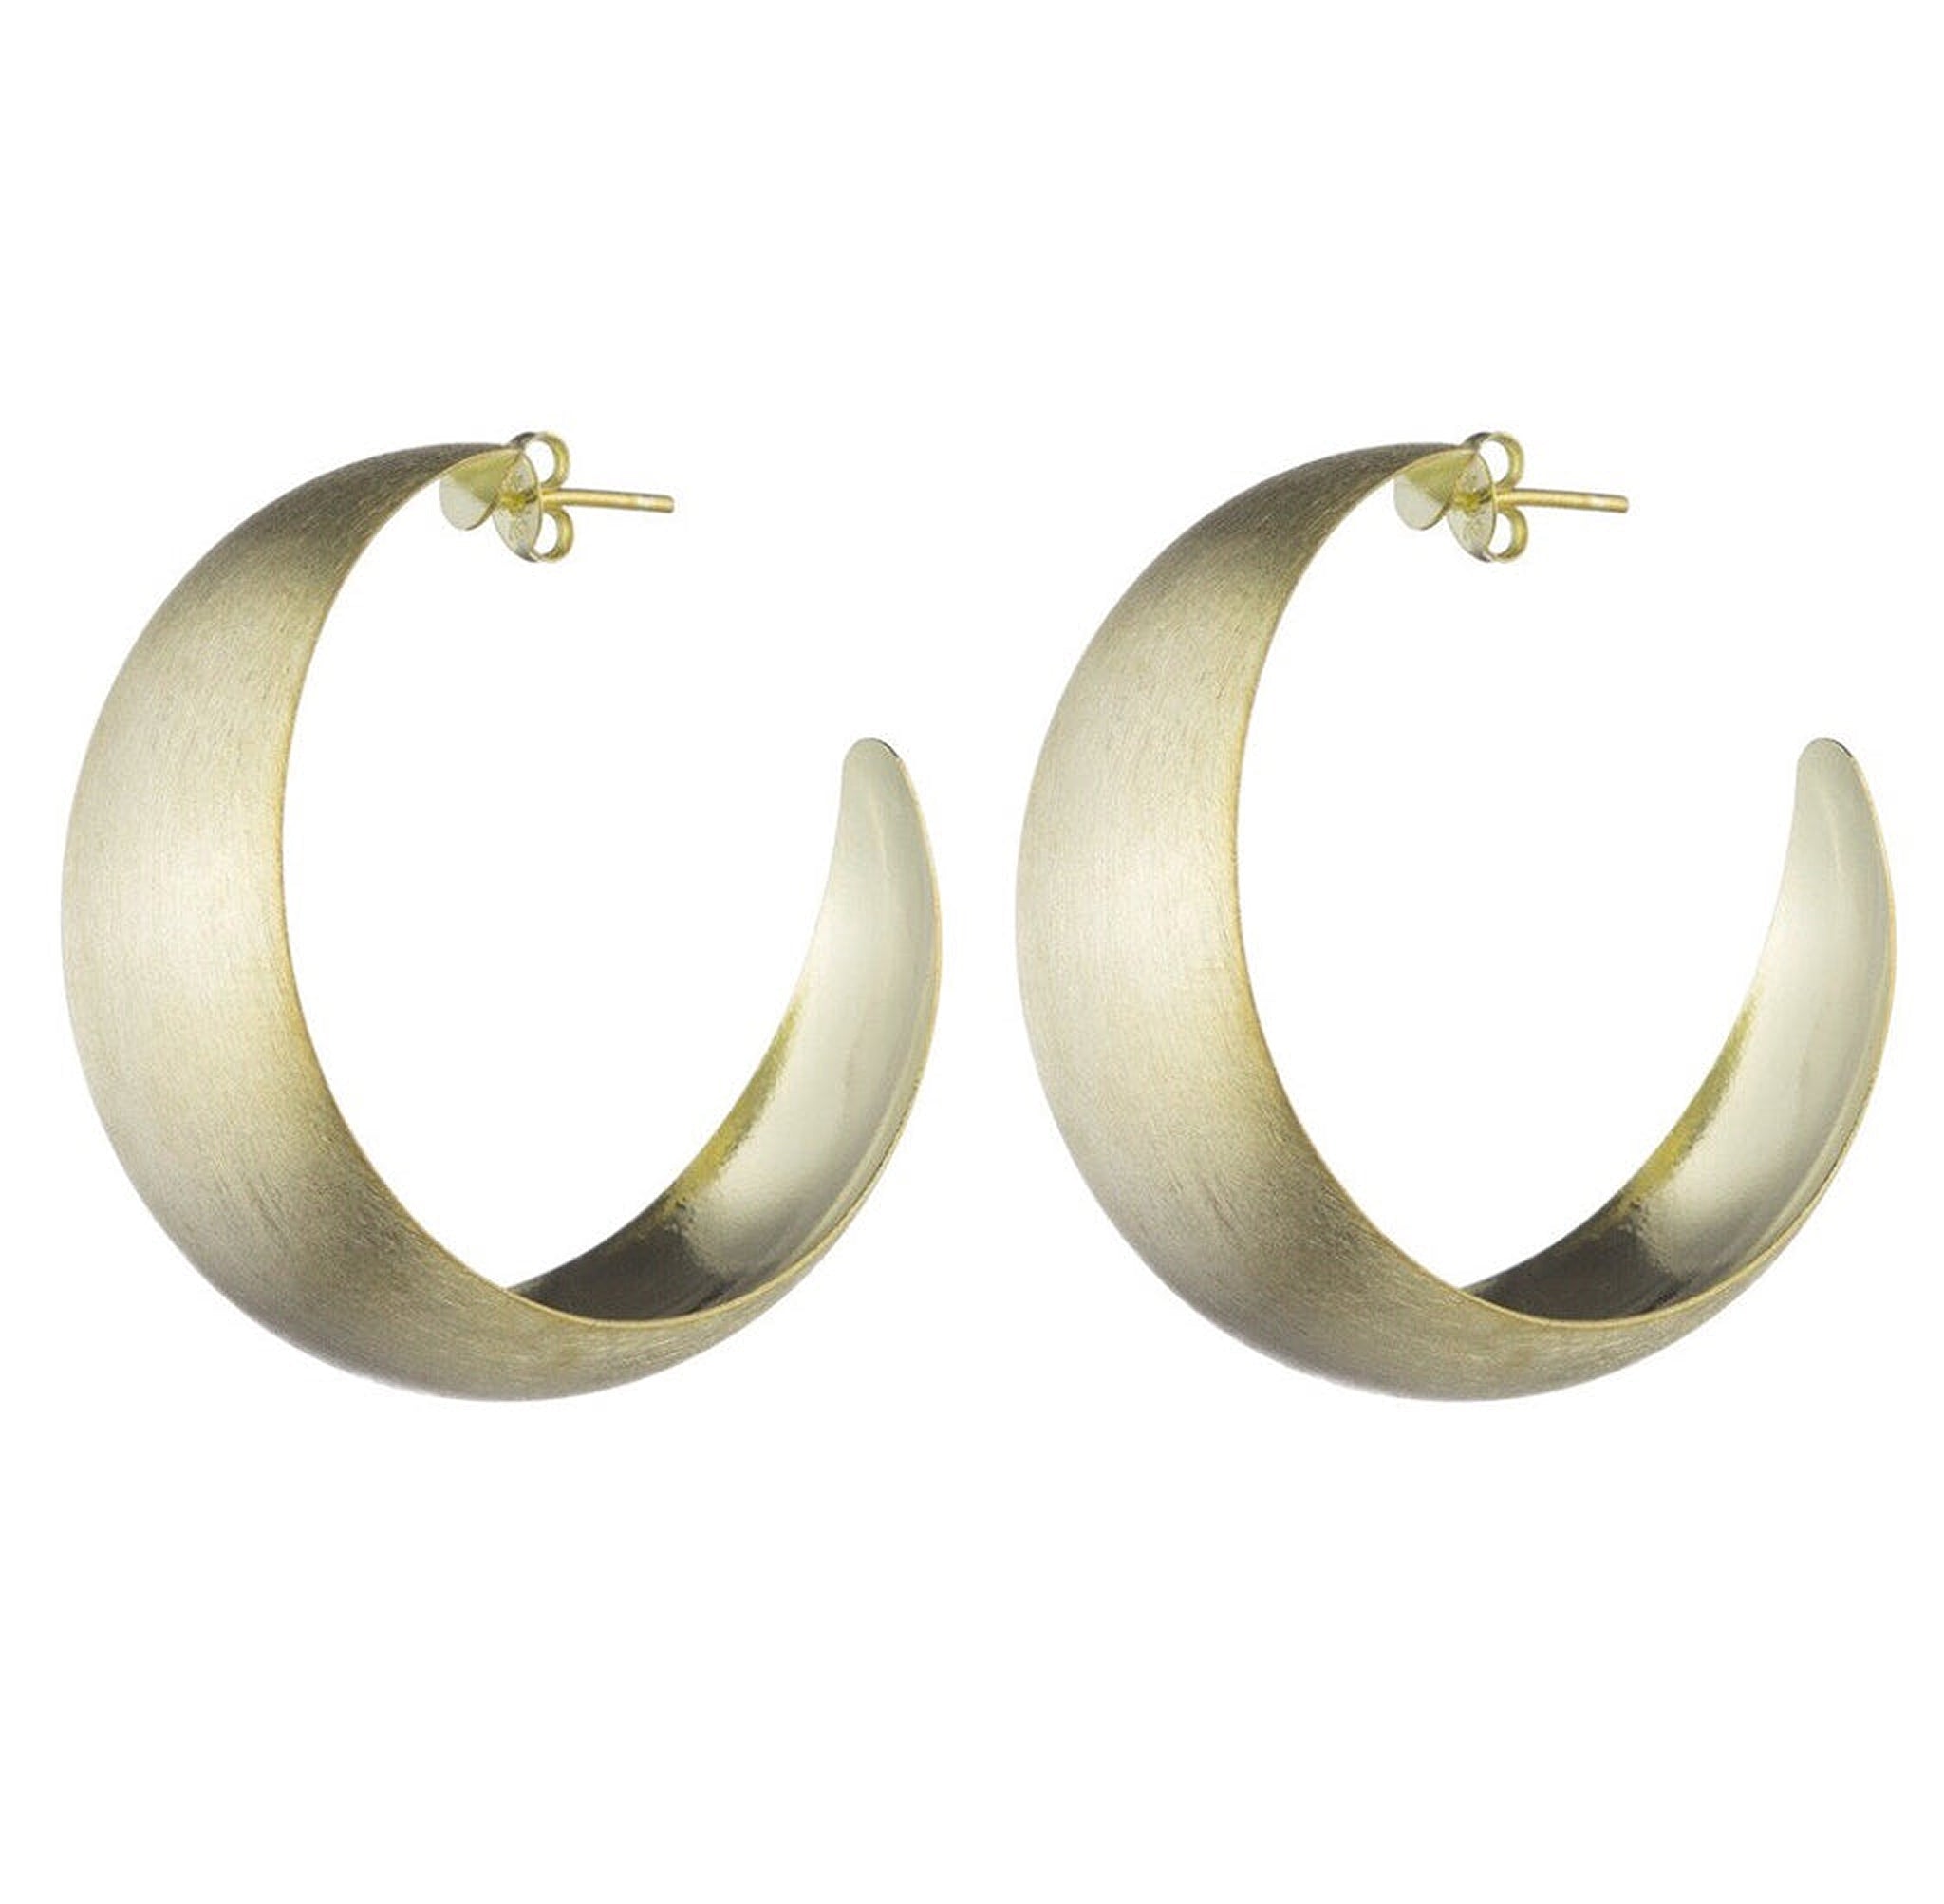 Sheila Fajl Booke Wide Curved Statement Hoop Earrings in Brushed Gold Plated